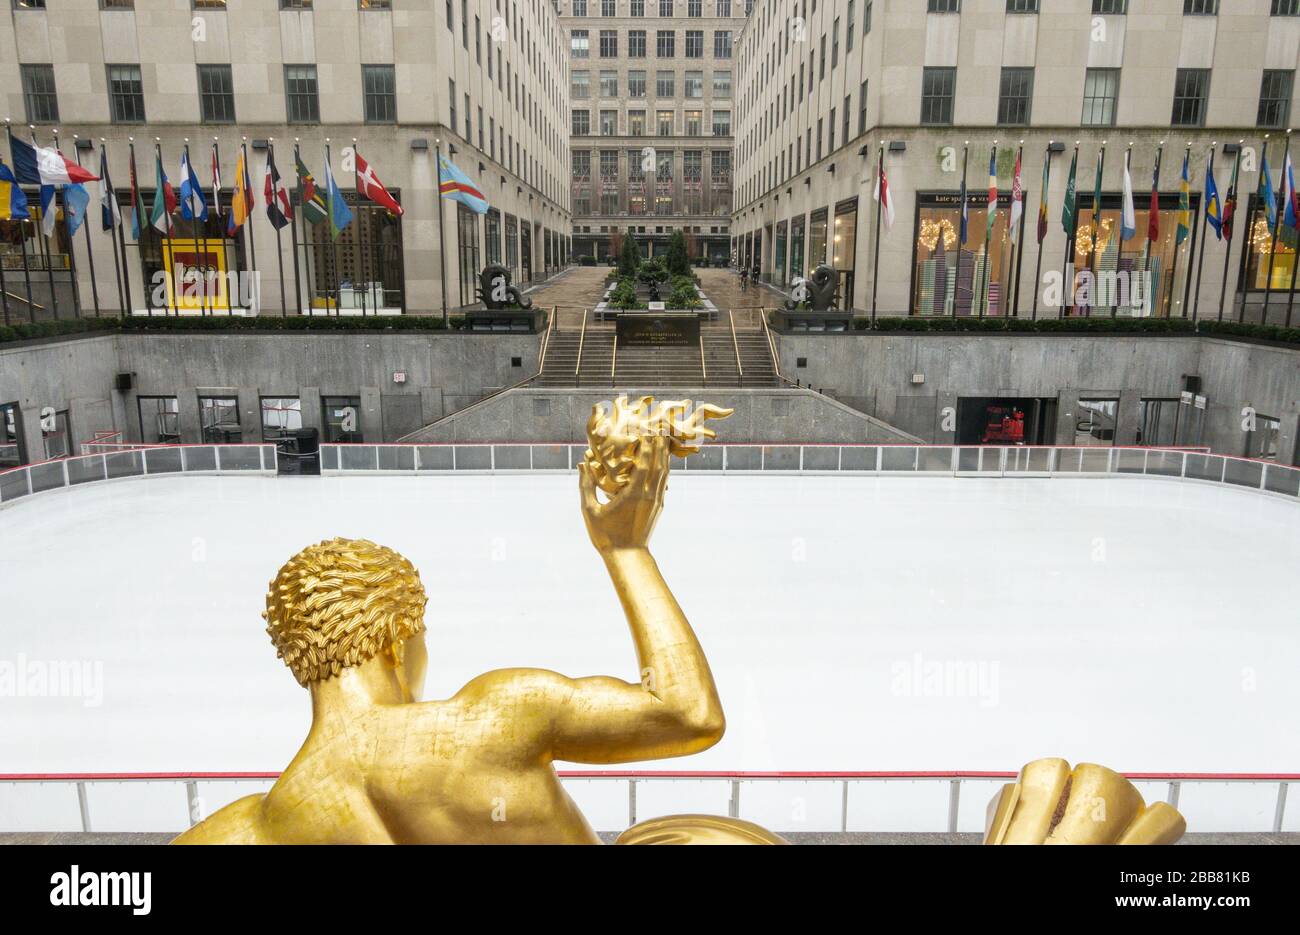 Foggy Rockefeller Center is deserted due to the COVID-19 pandemic, March 2020, New York City, USA Stock Photo